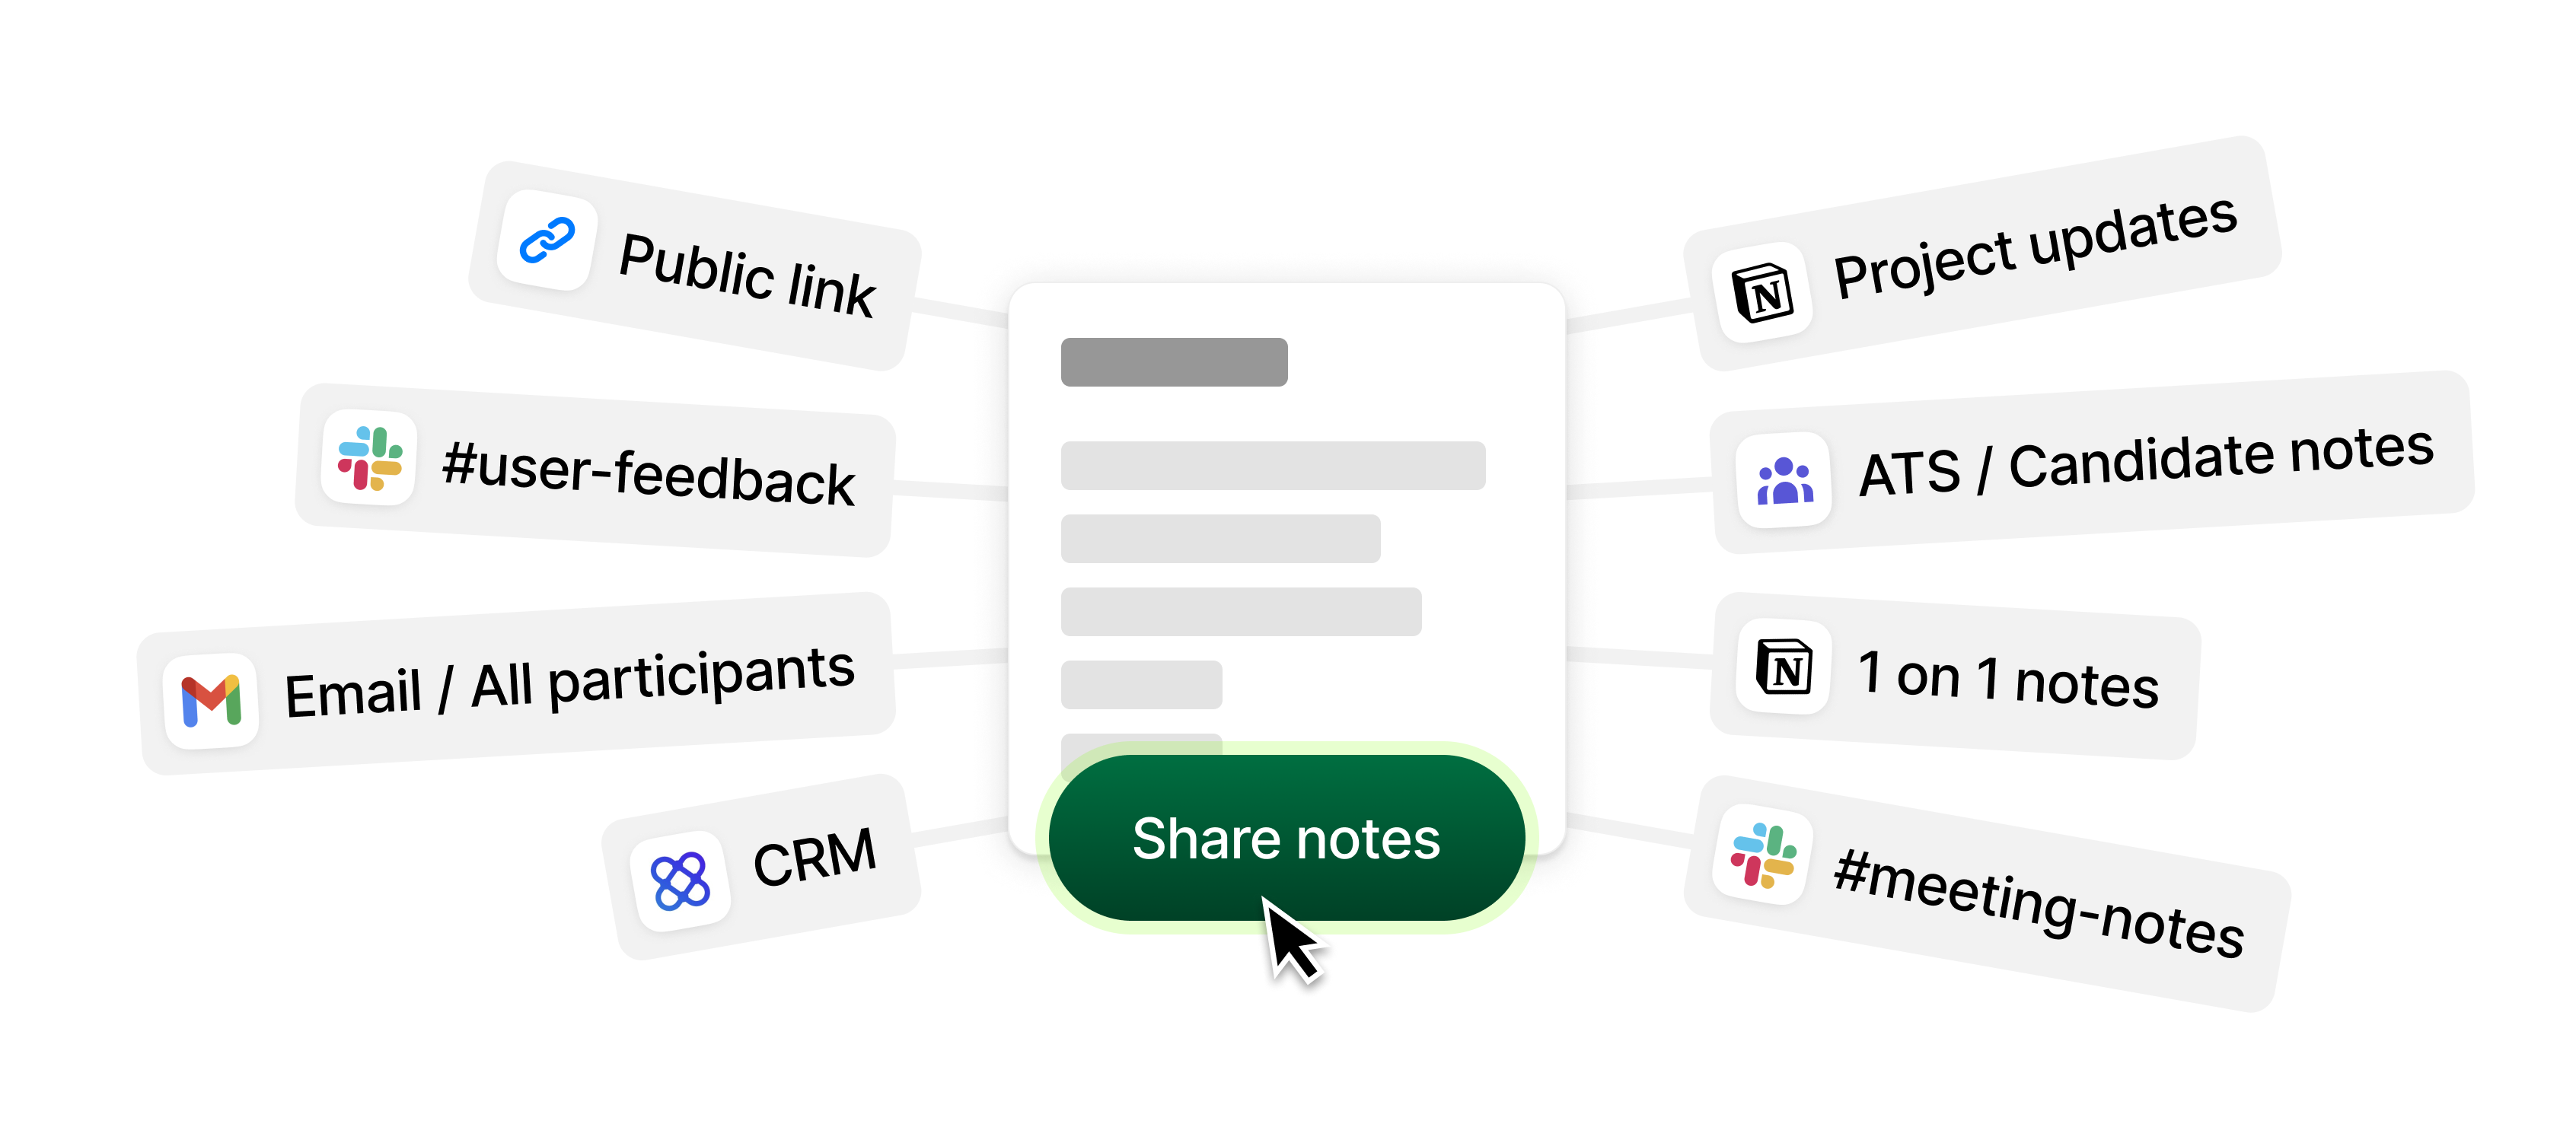 Share your notes with one click